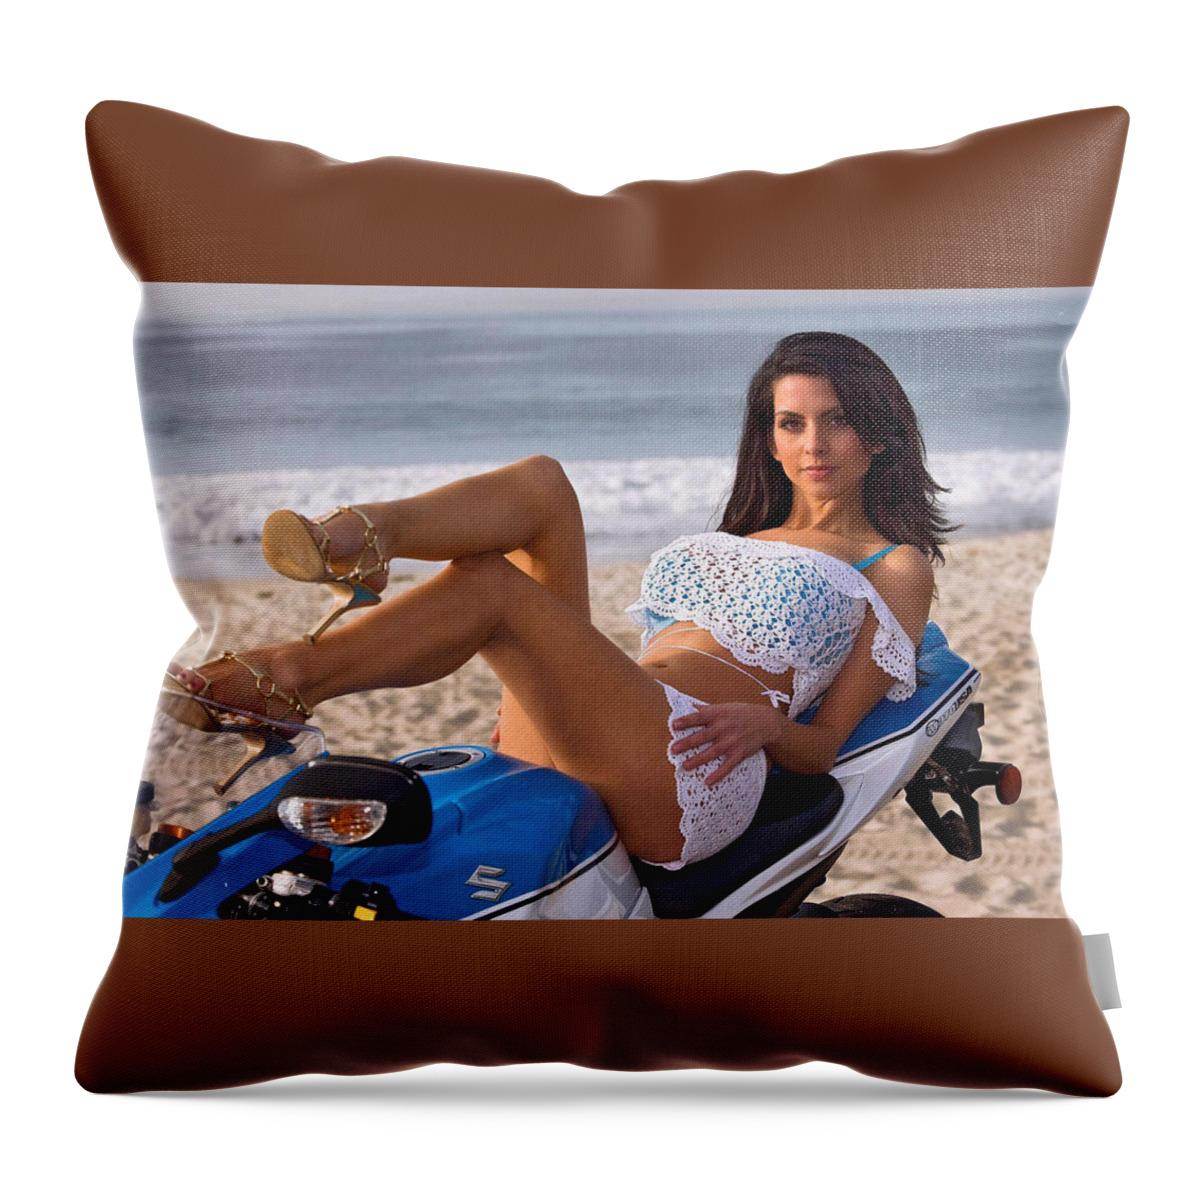 Girl Throw Pillow featuring the photograph How about those legs? by Lawrence Christopher